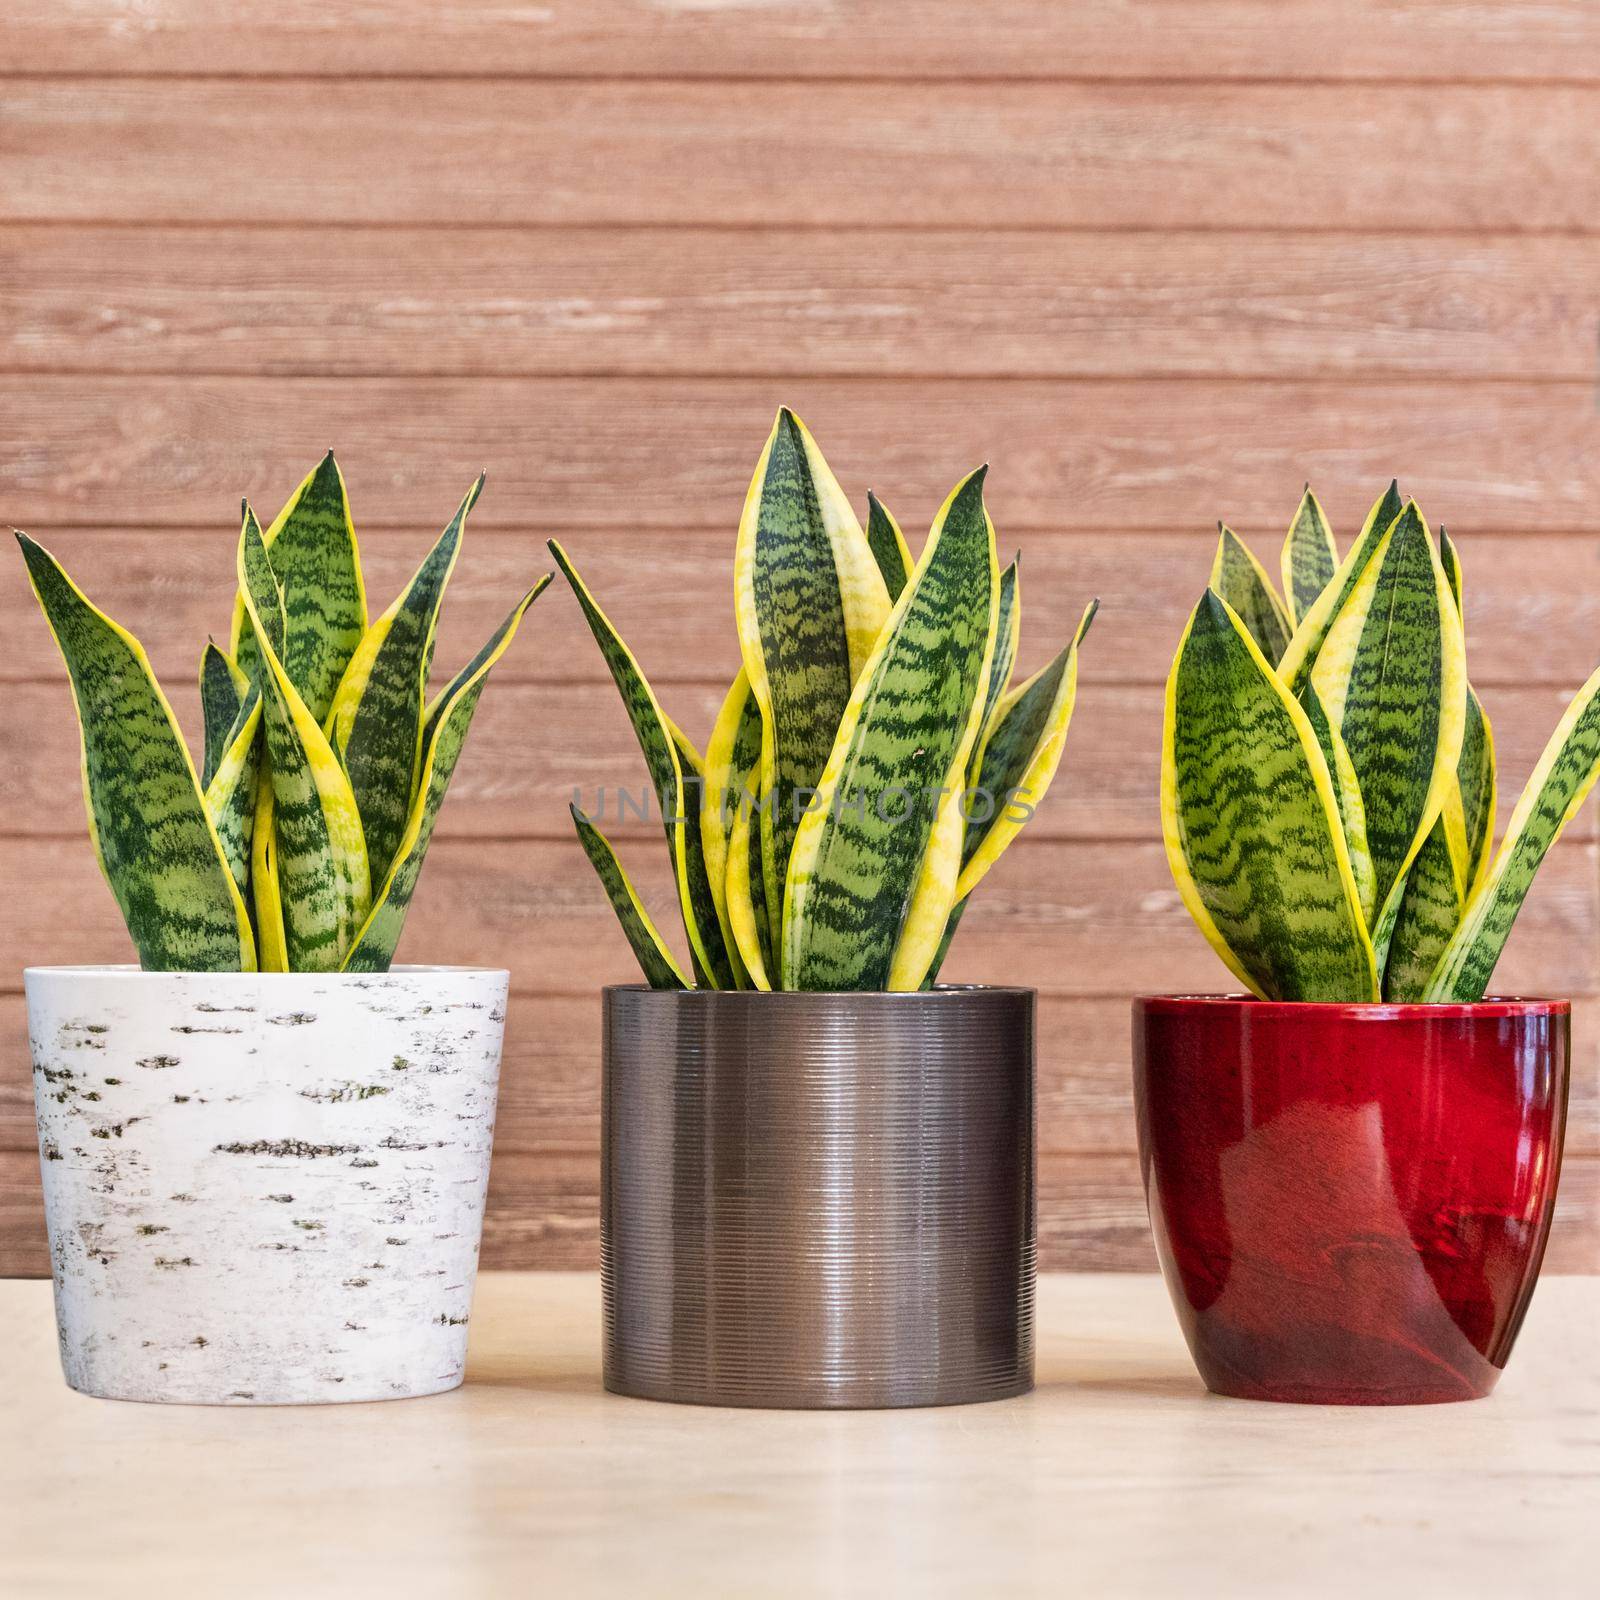 Sansevieria trifasciata Laurentii - Variegated Snake Plant in the pot by ferhad